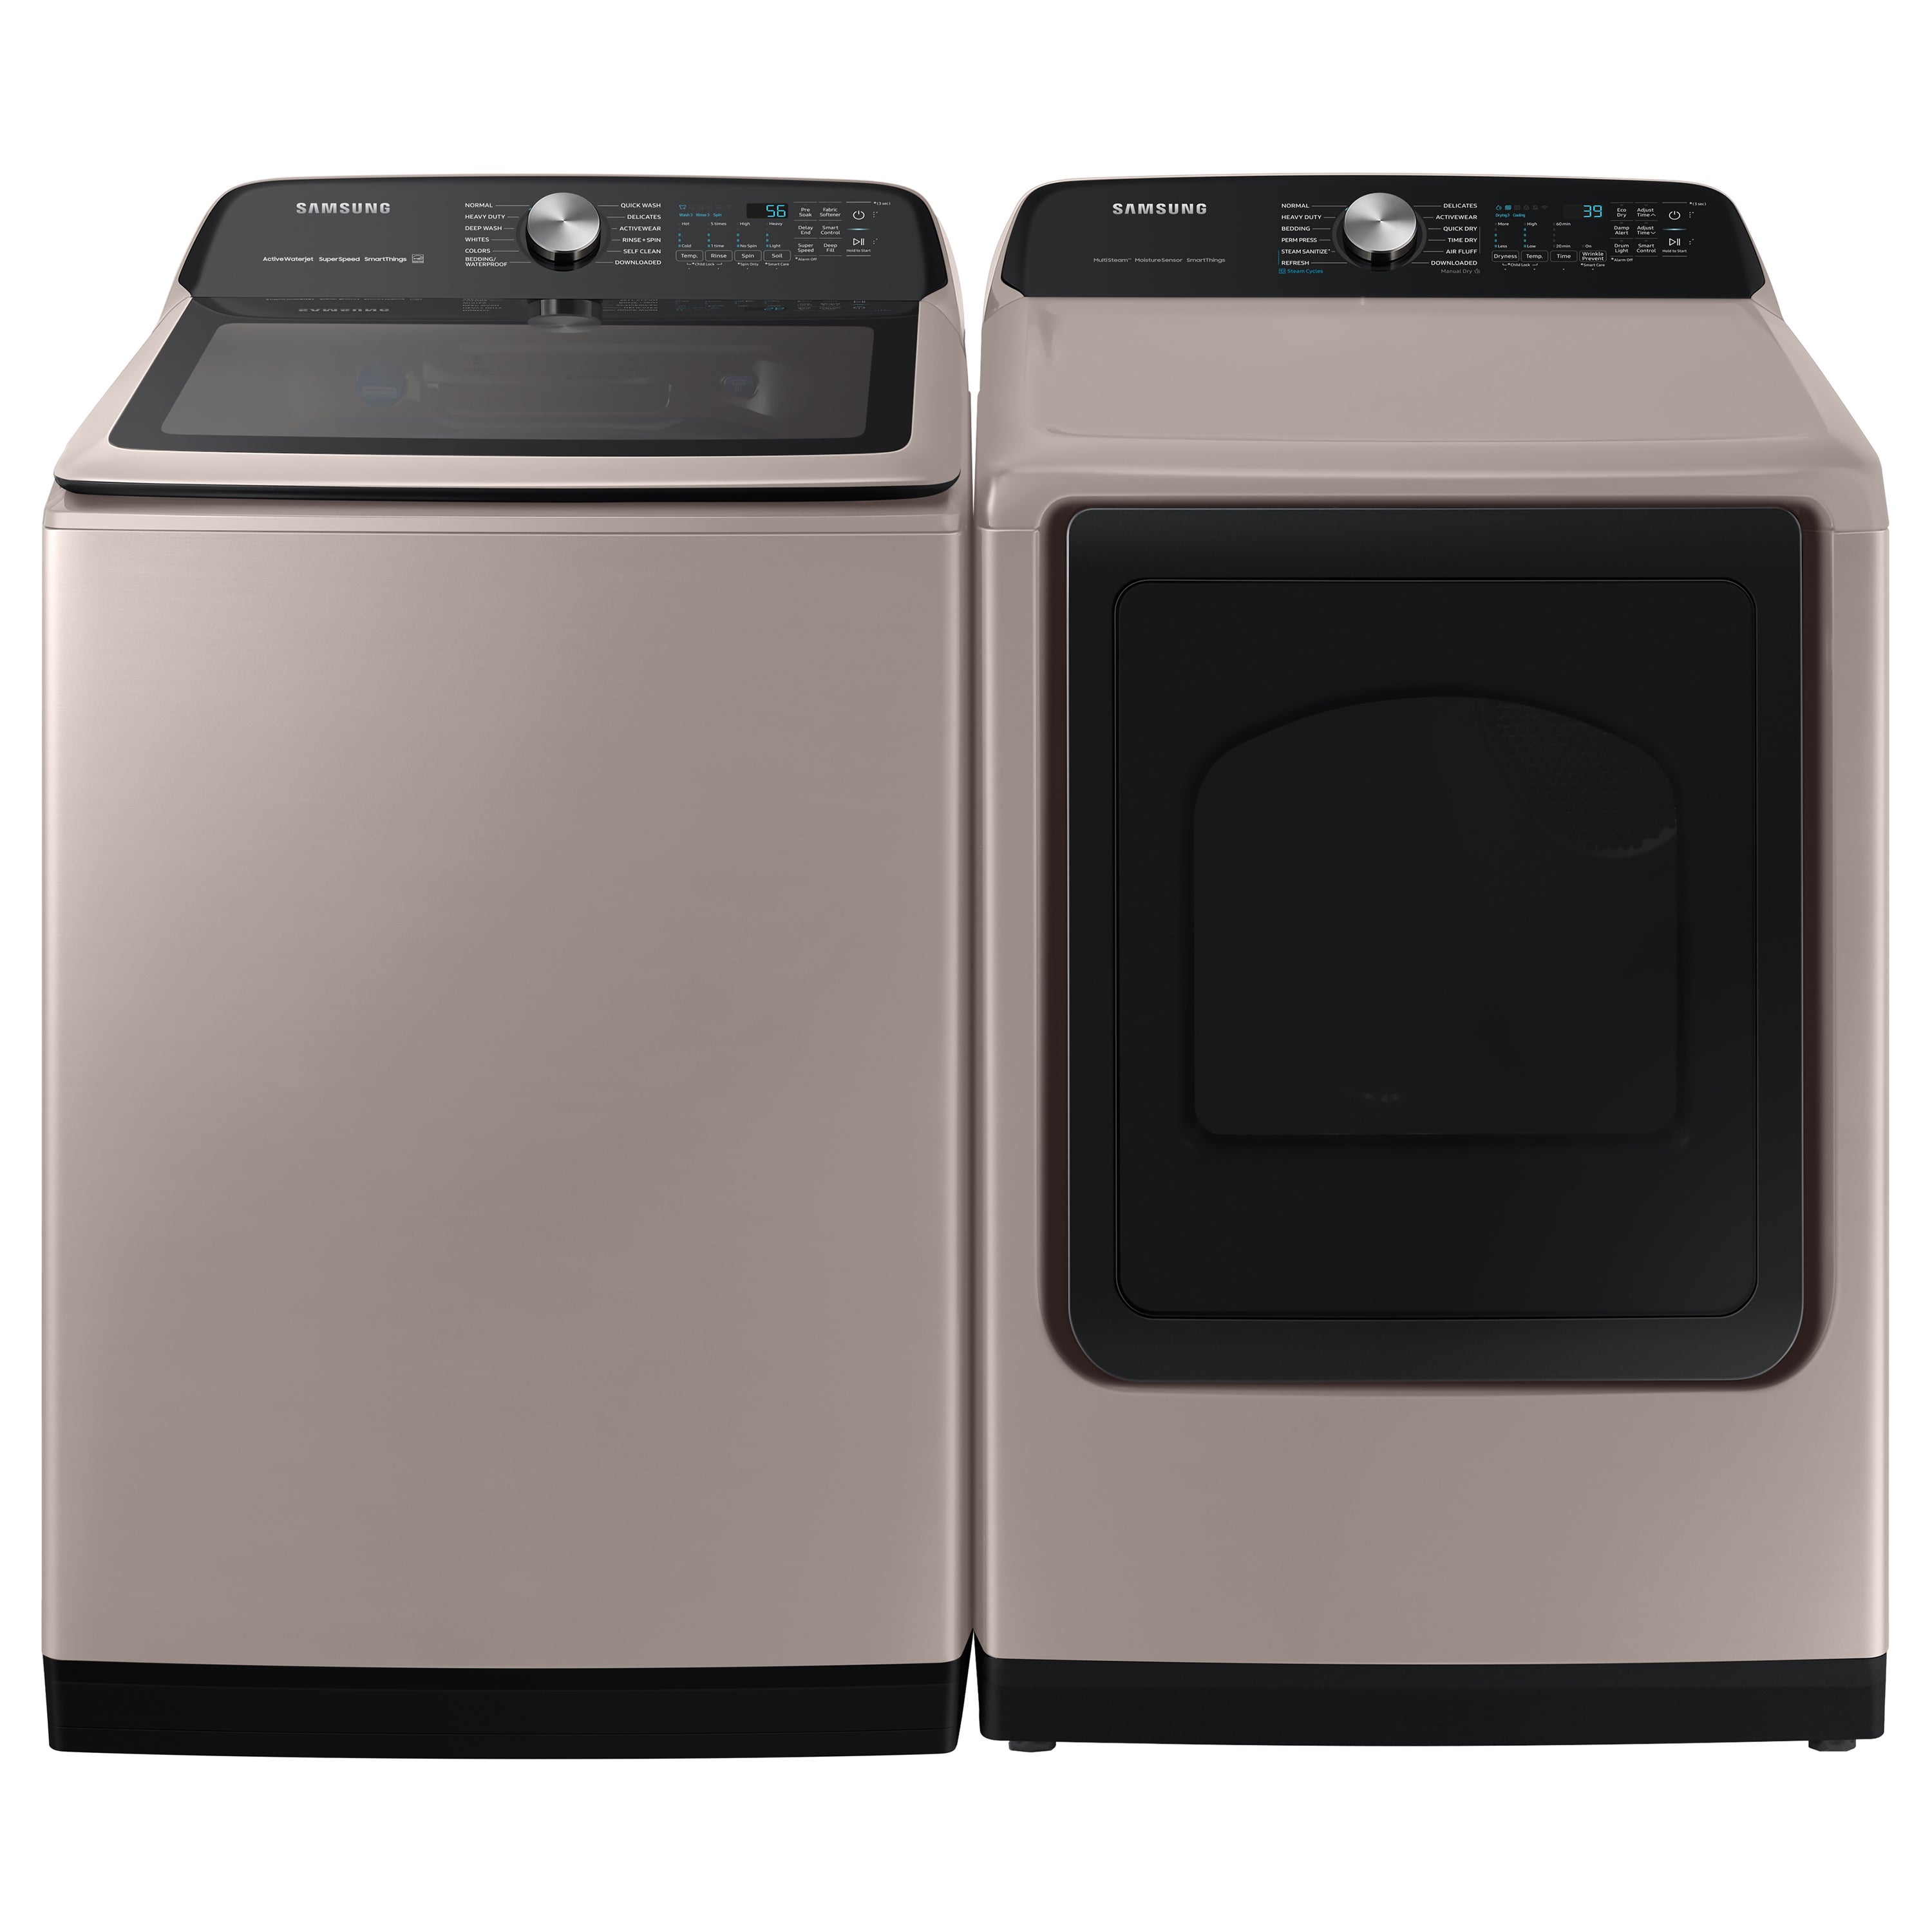 Samsung Large Capacity Top-Load Washer & Electric Dryer with Steam and Smart Care in Champagne